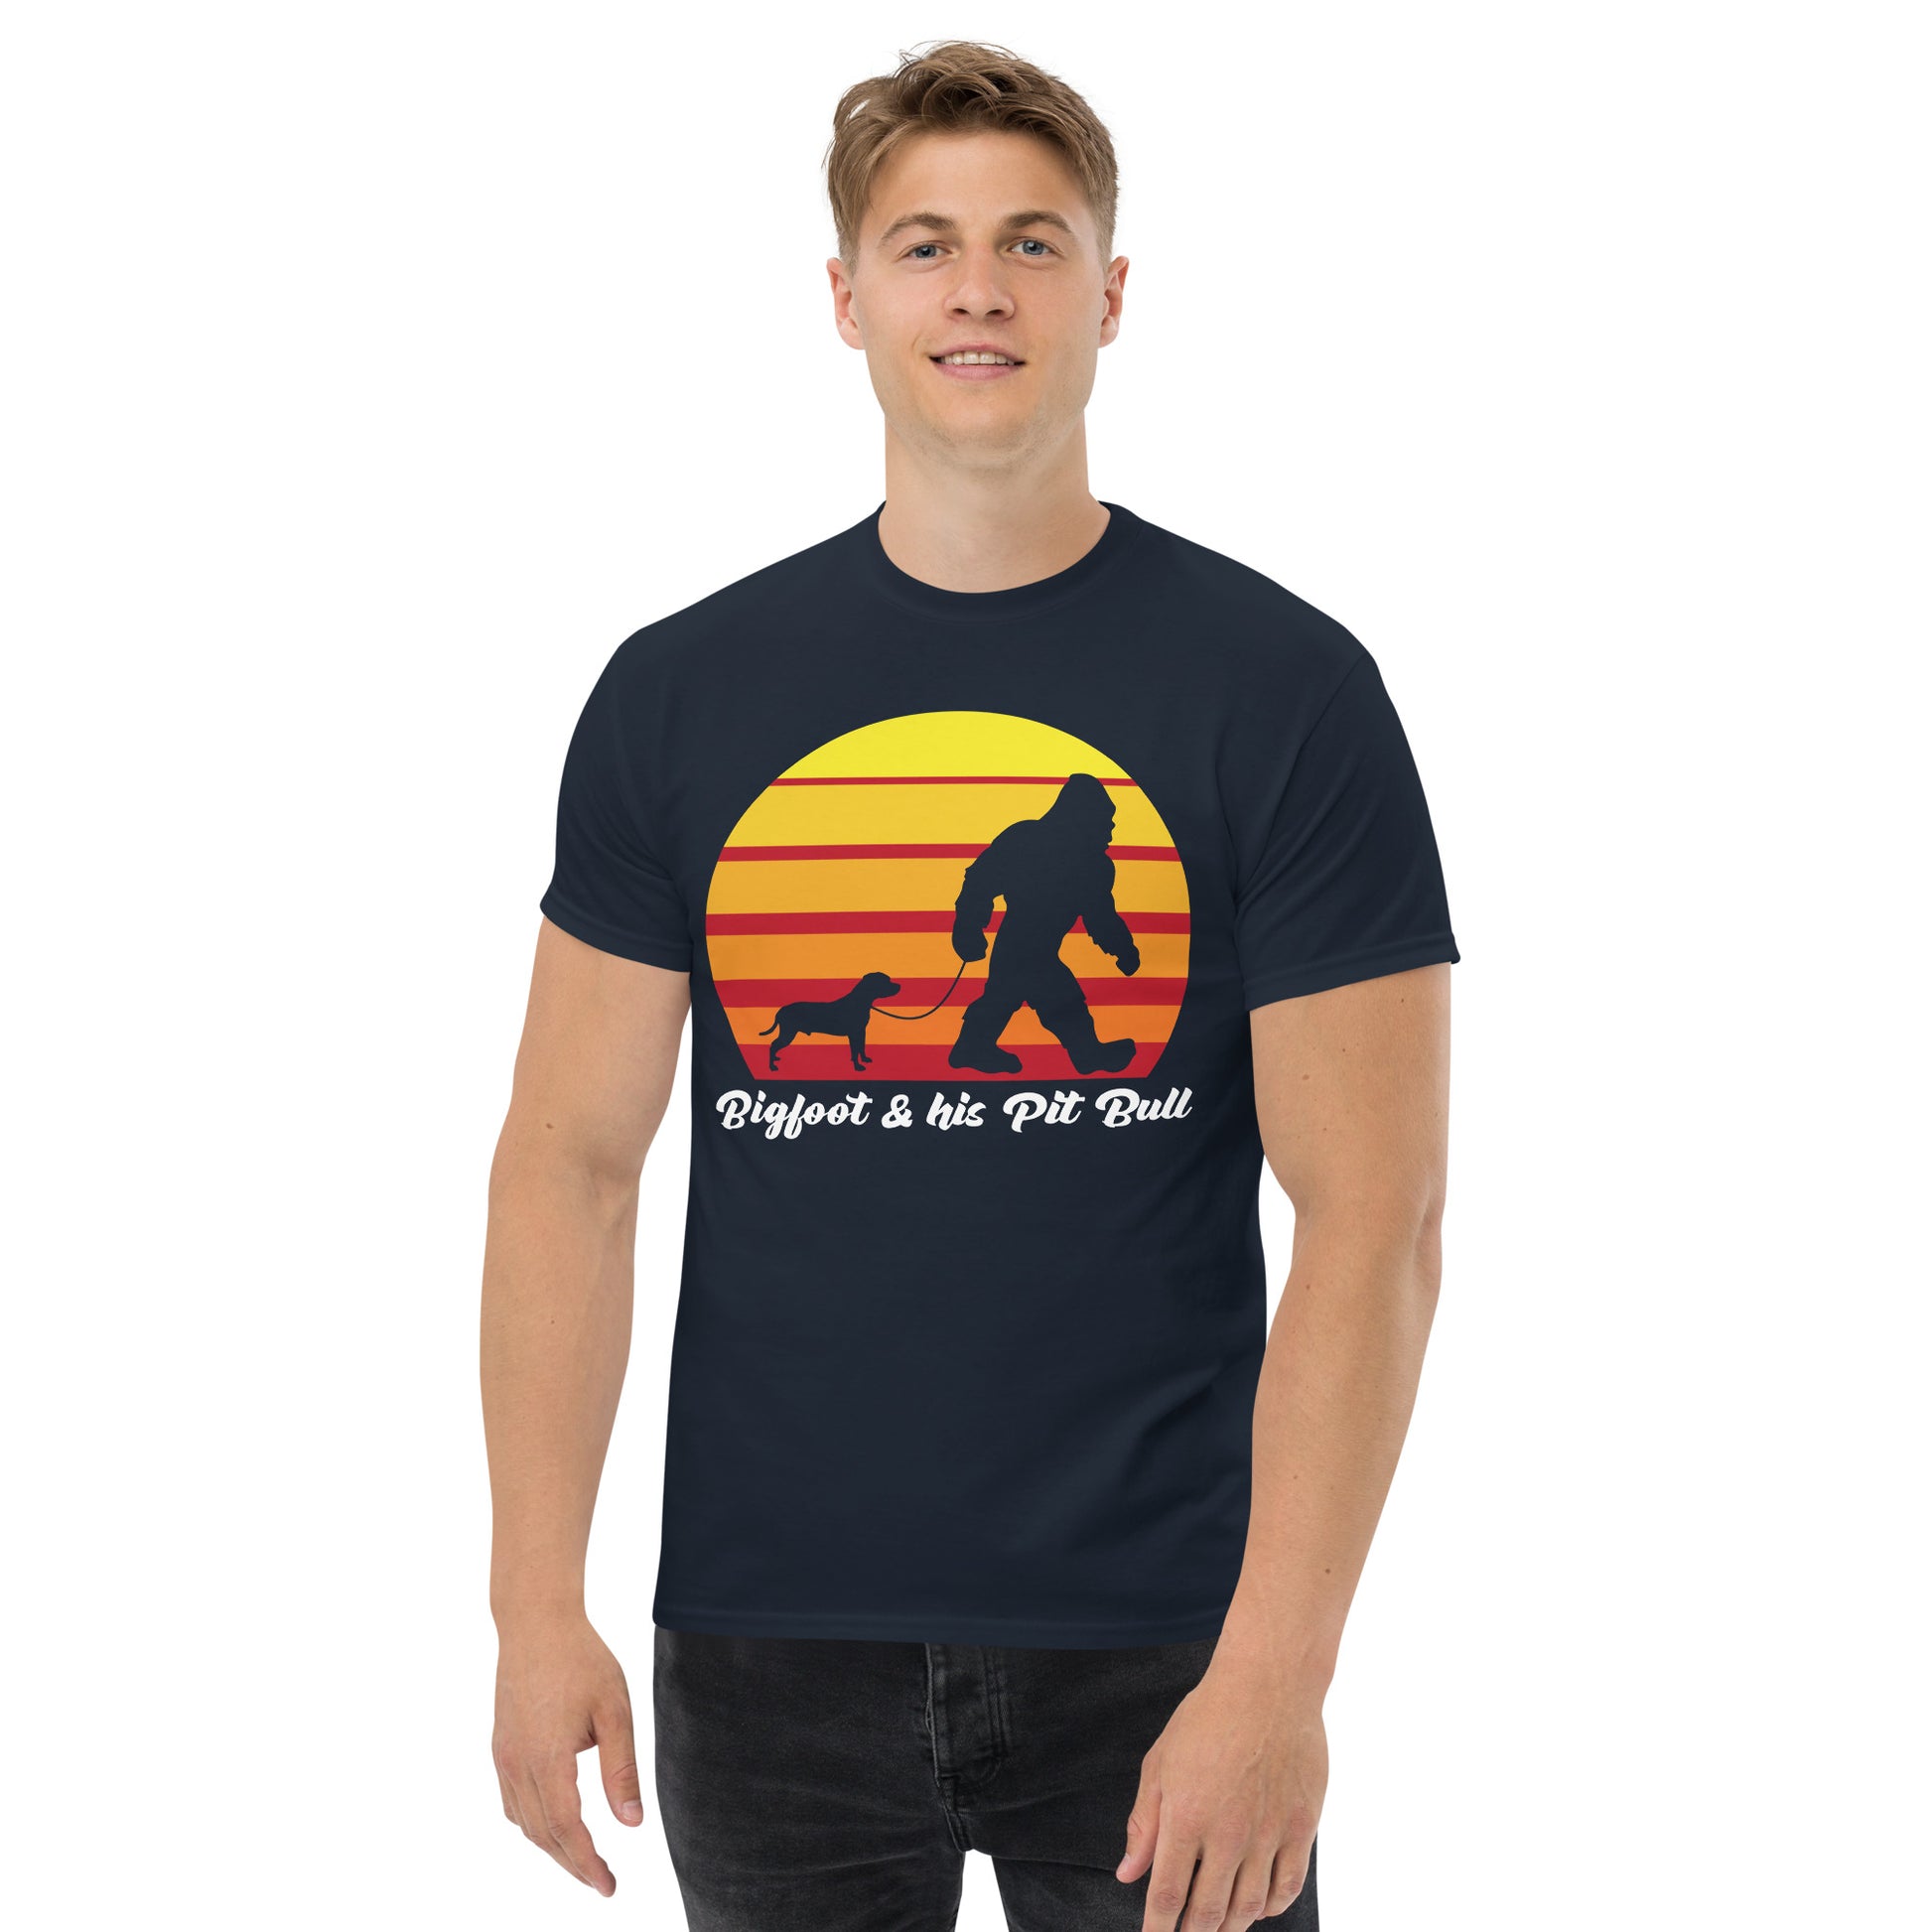 Bigfoot and his American Pit Bull men’s navy t-shirt by Dog Artistry.